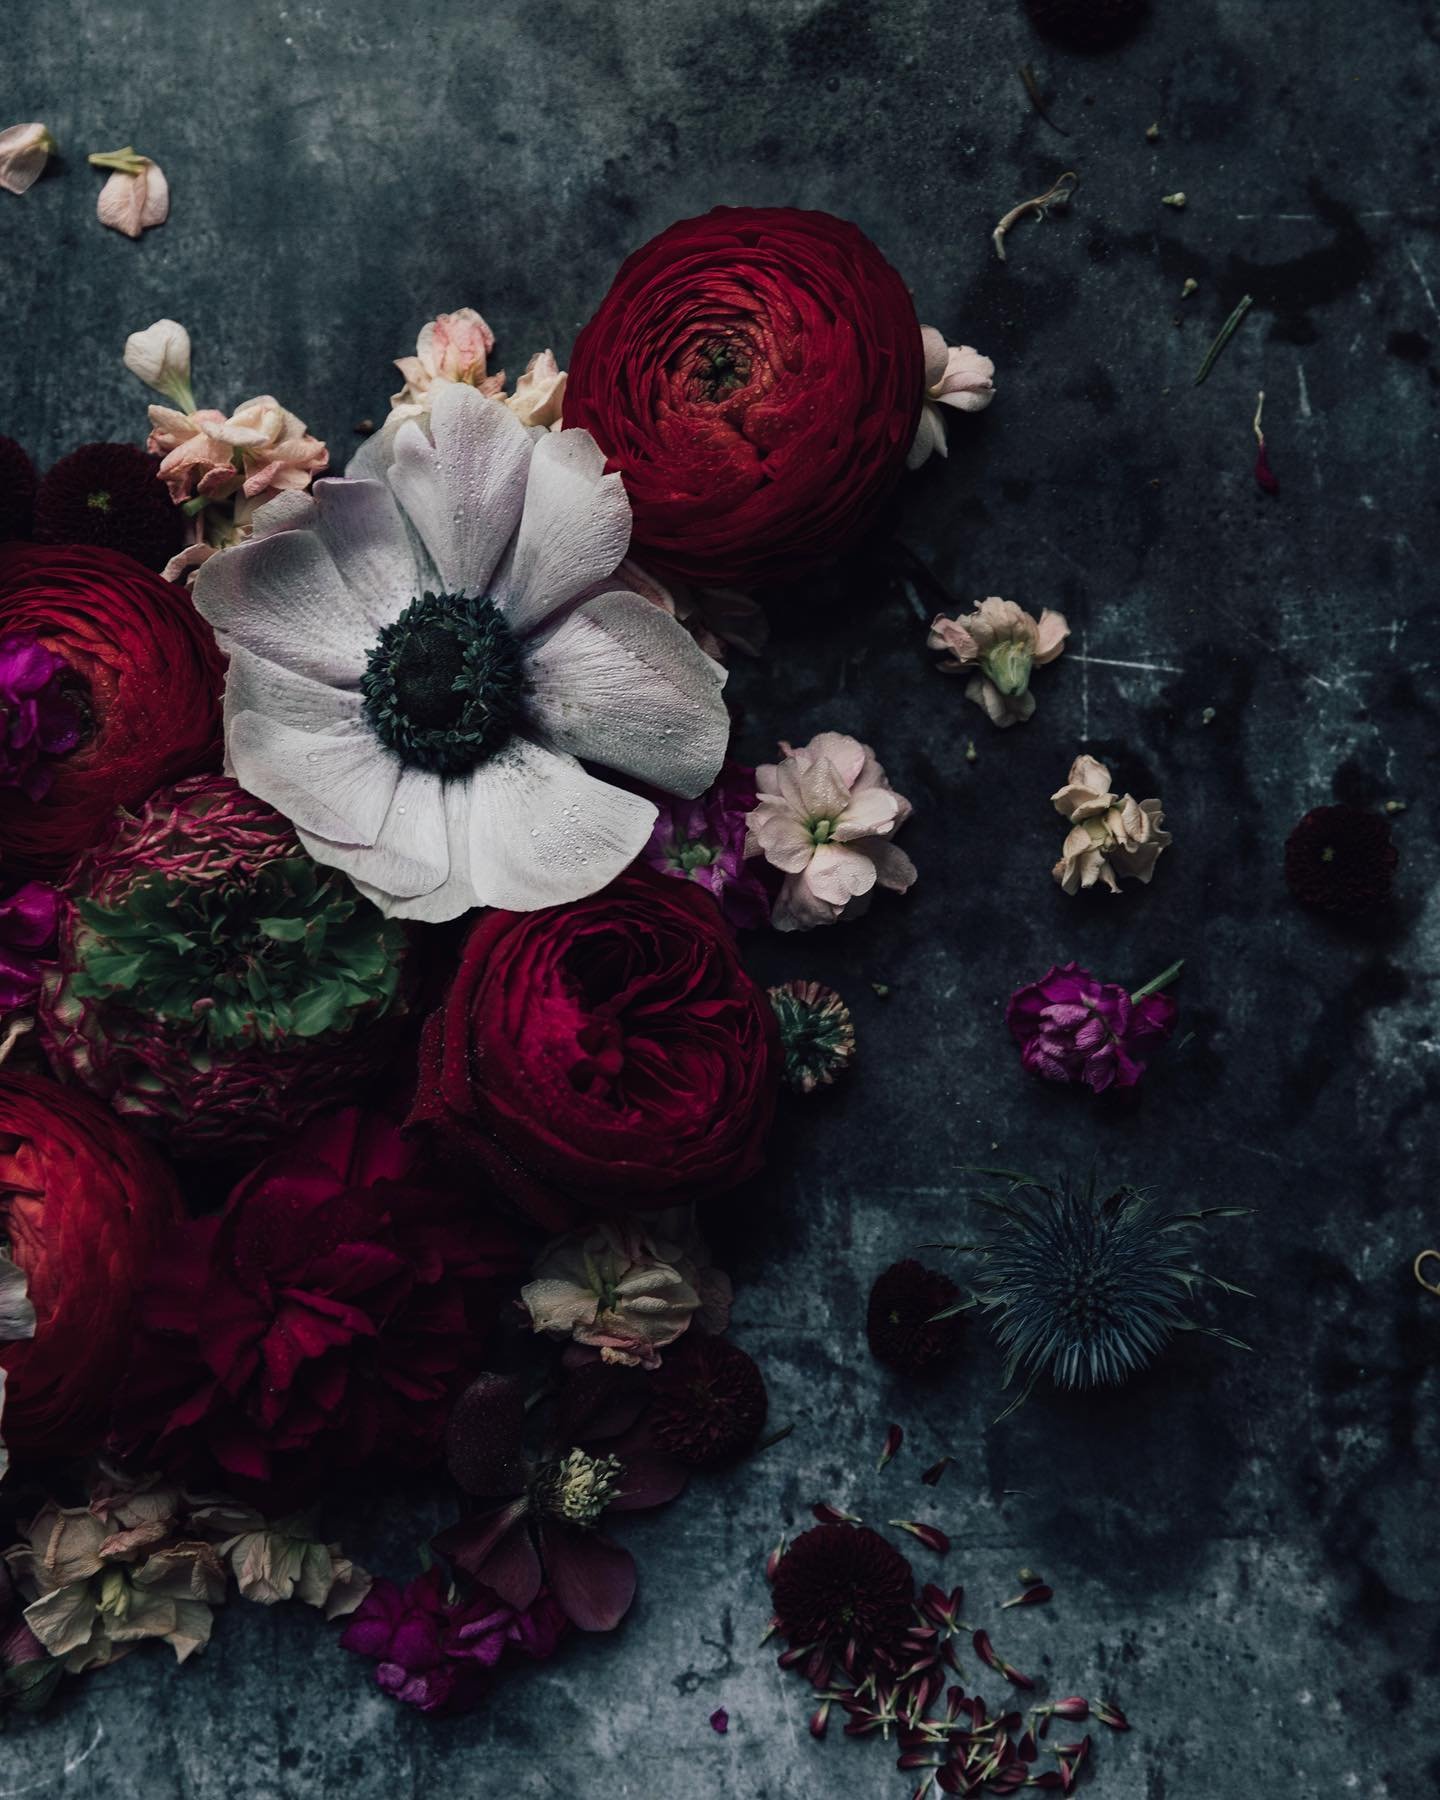 A little play with flowers I did a while ago 🤍 

. 
.
.
.

#thedarkandmoodyedit 
 #thebeautyinspring #lavieestpo&eacute;sie #awakethesoul  #lookslikefilm #dearphotographer #thegentlemanifesto #magic_in_the_details #brusselsphotographer #lavieestpo&e